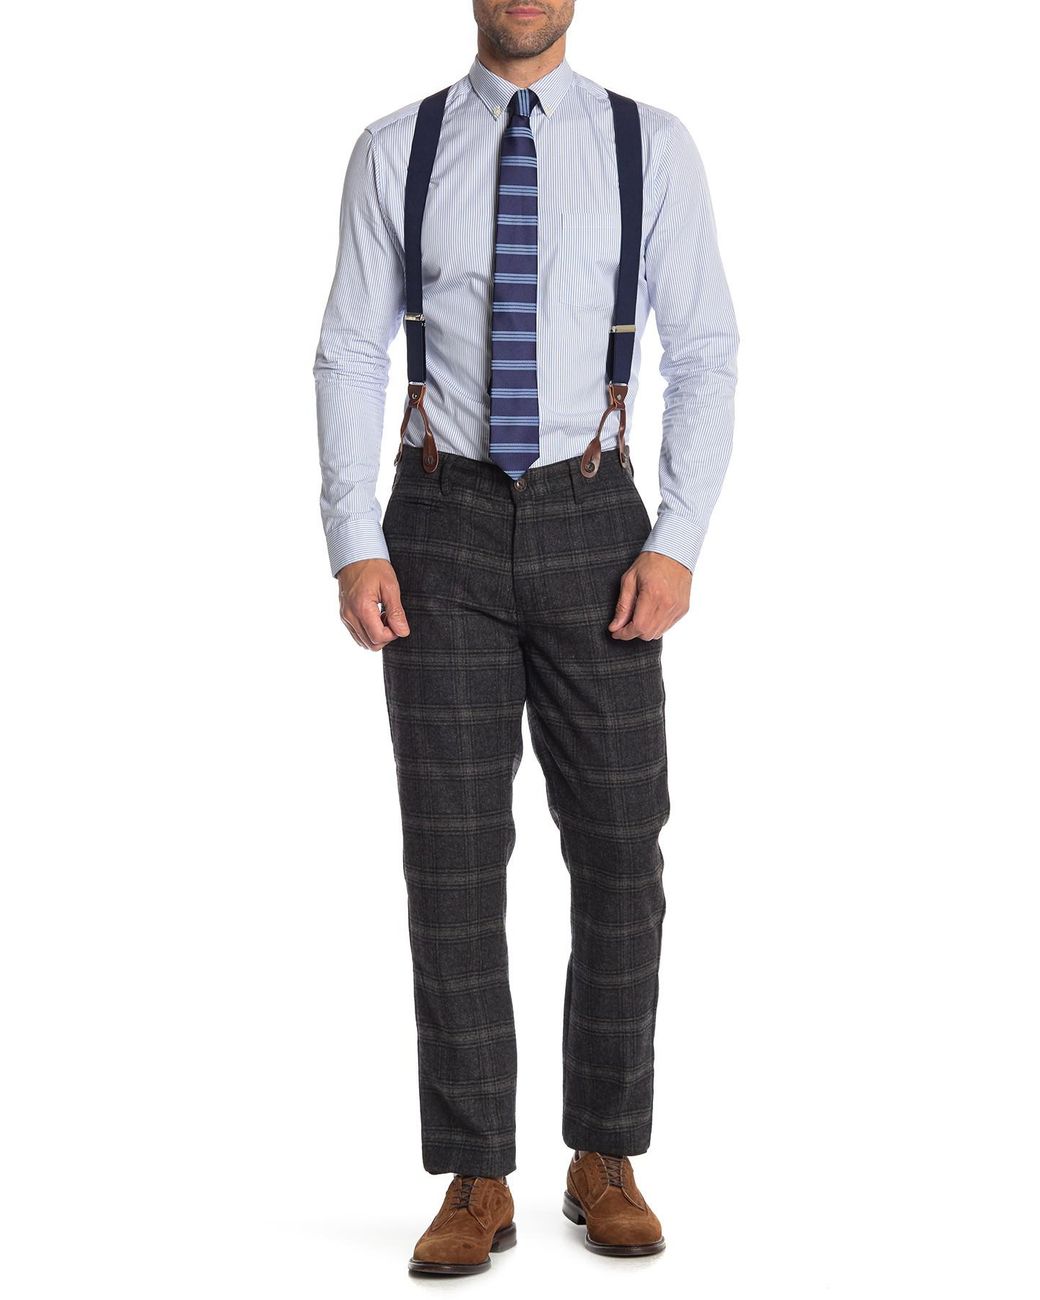 20 Stylish Men Outfits With Suspenders  Styleoholic